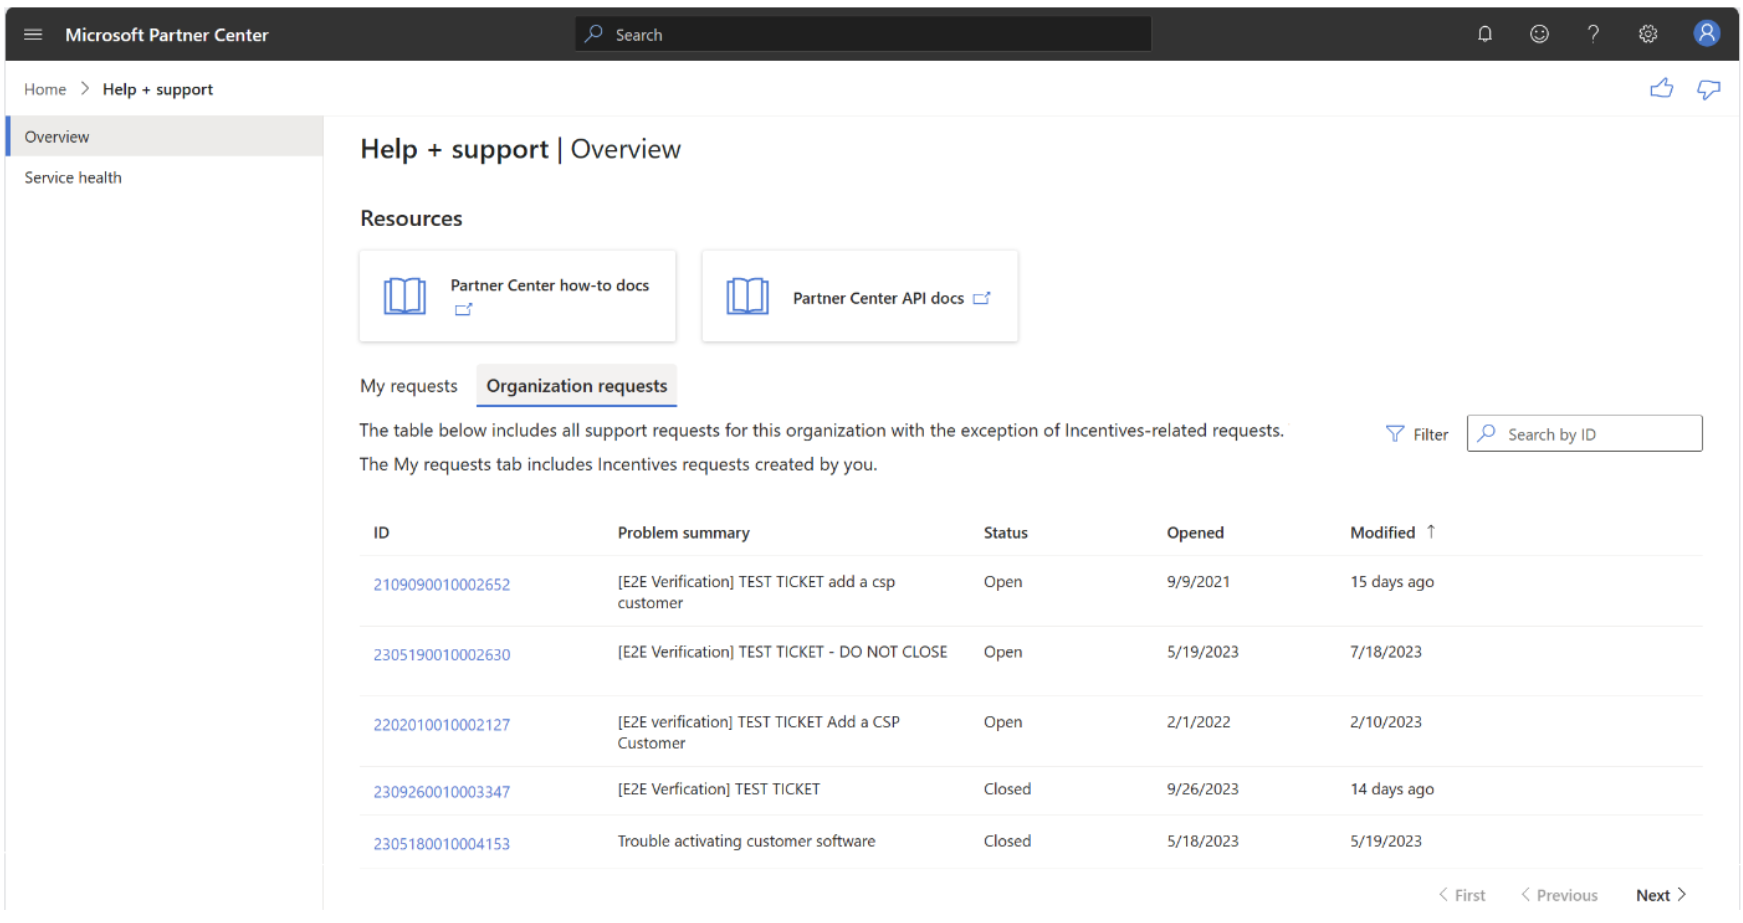 Screenshot showing the Organization requests tab of the Help + Support Overview page. Several example test tickets are shown.